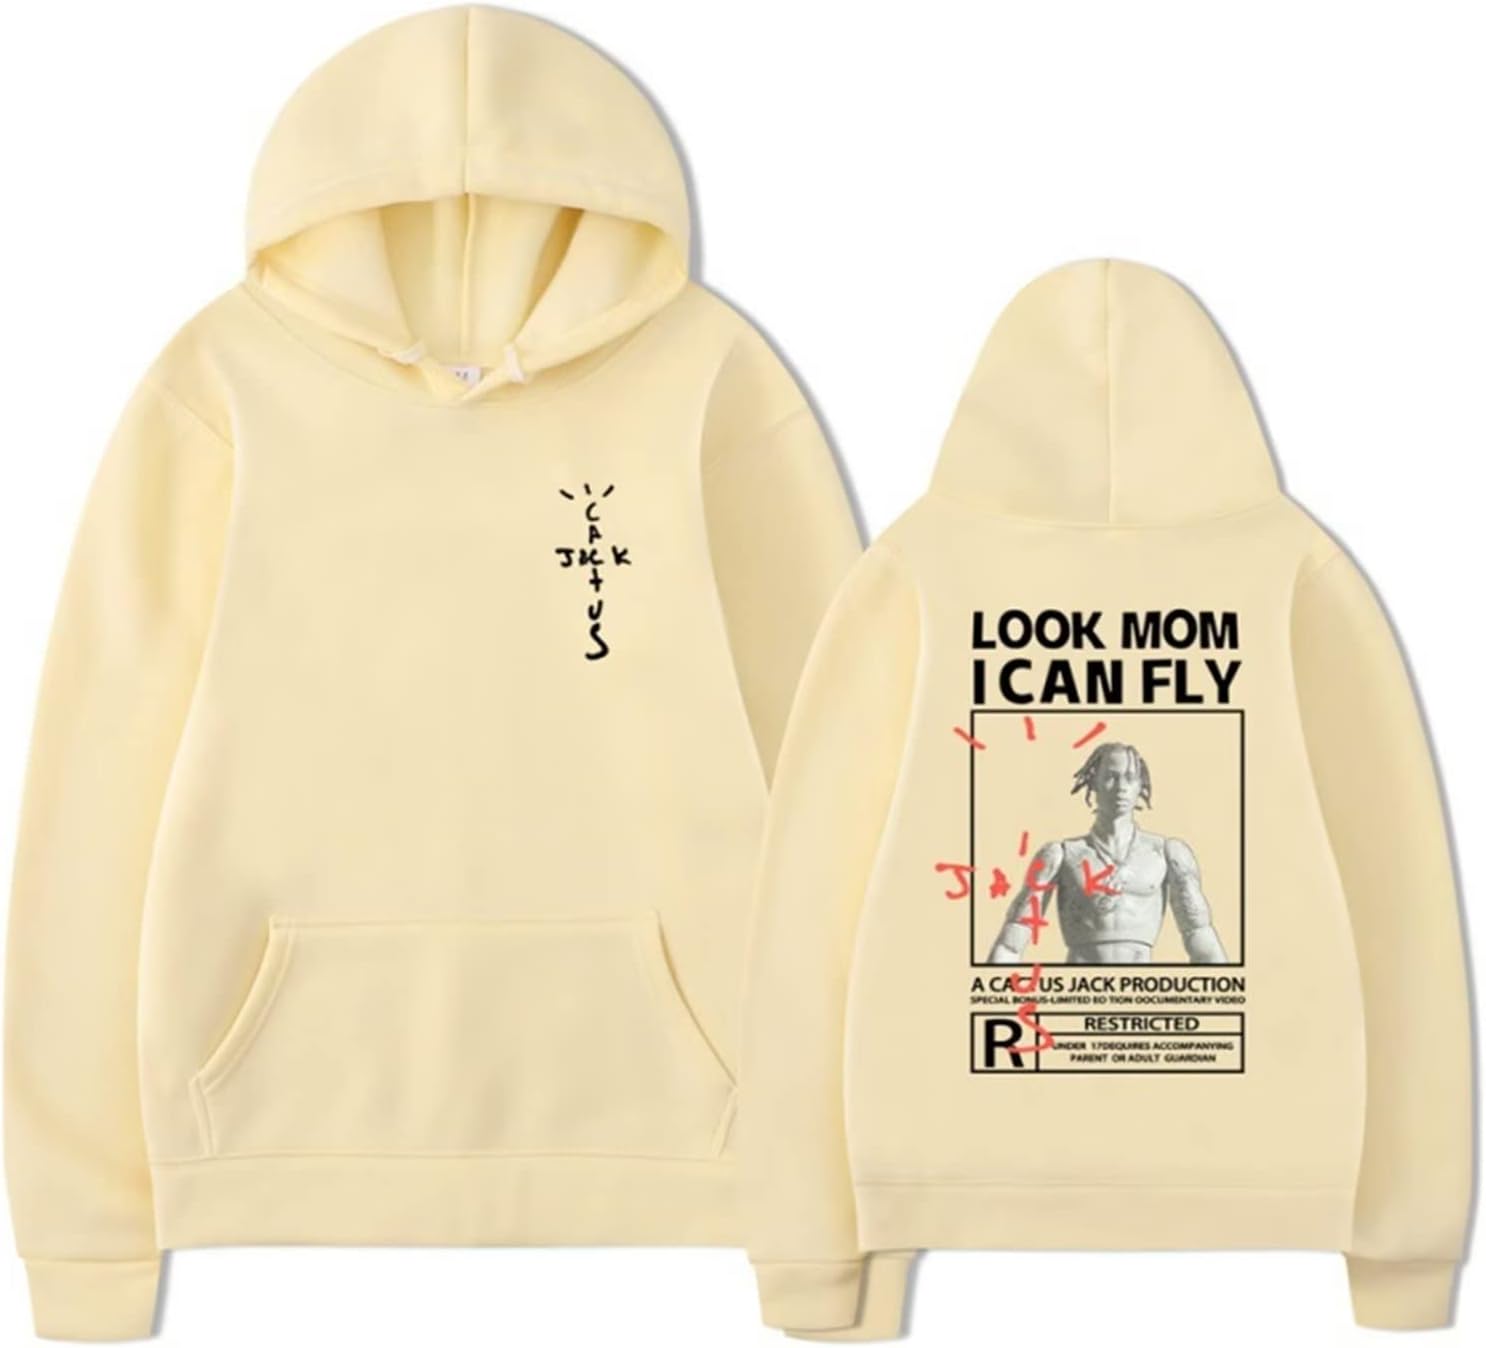 Unique Textures and Fabric Choices in Travis Scott Hoodie